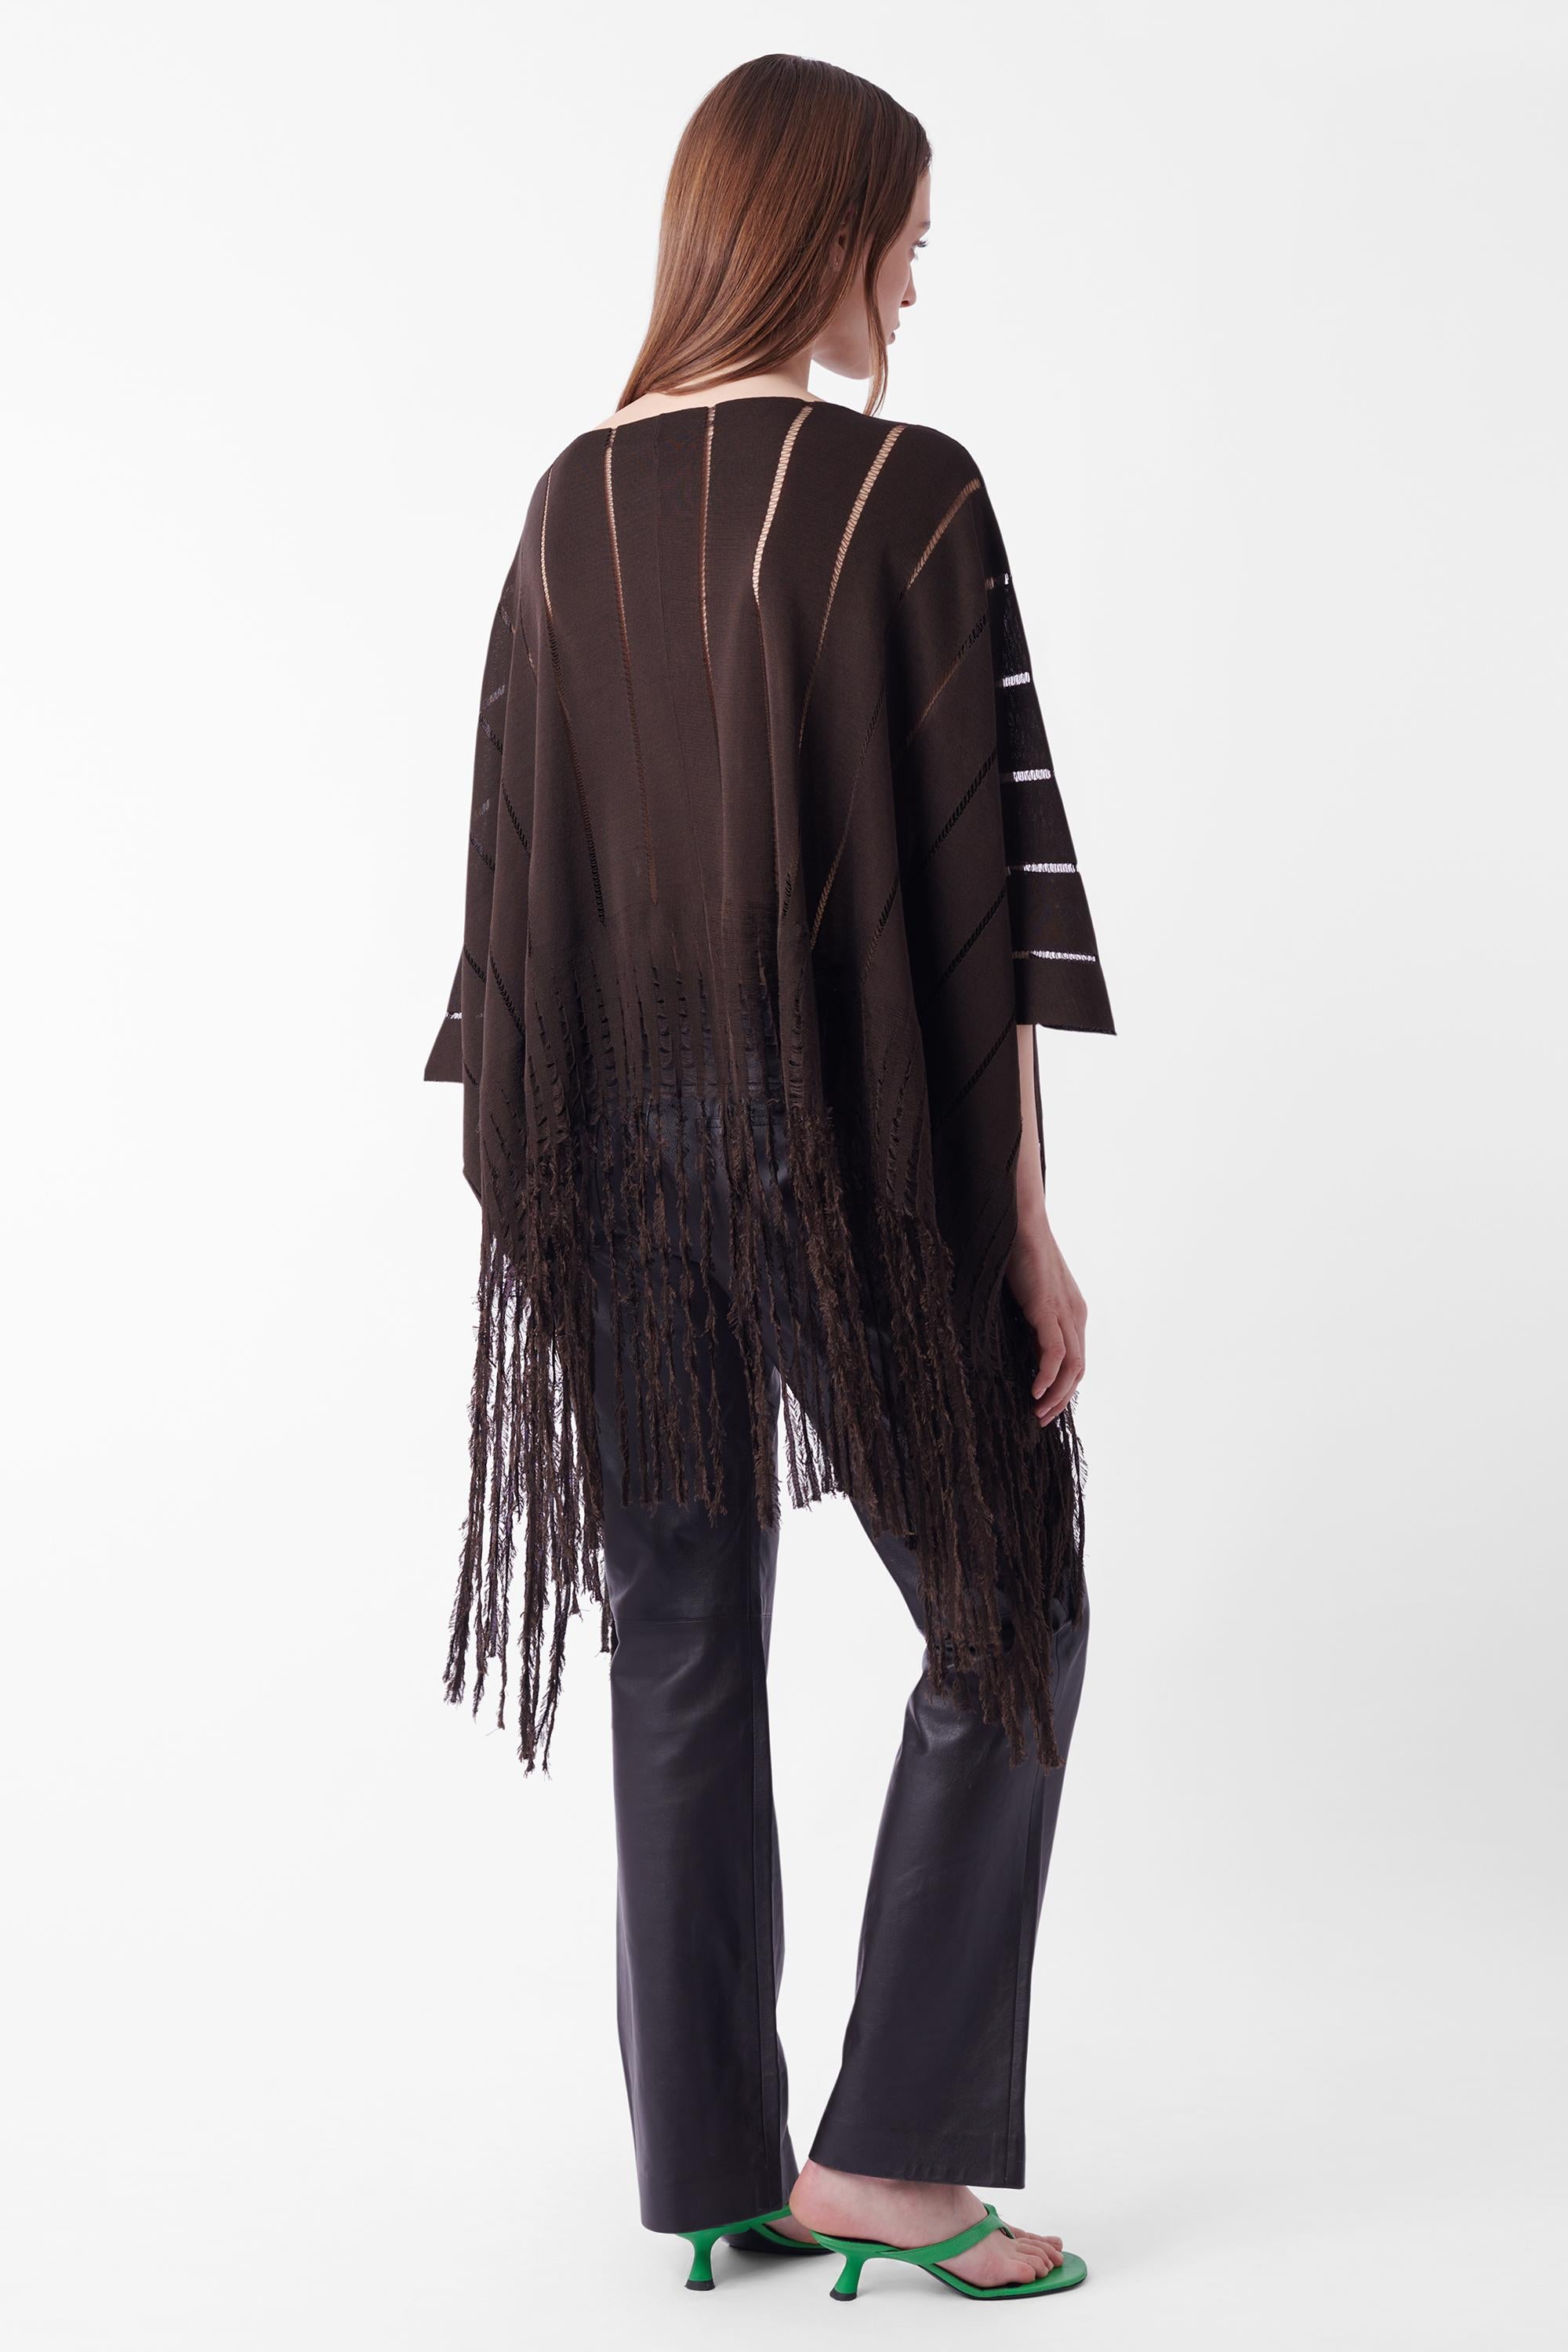 We are excited to present this Yves Saint Laurent by Tom Ford Spring Summer 2002 poncho. Features safari fringe running along the hem and sheer open stitch detailing running in a vertical format. Can be worn as a skirt. In great vintage condition,